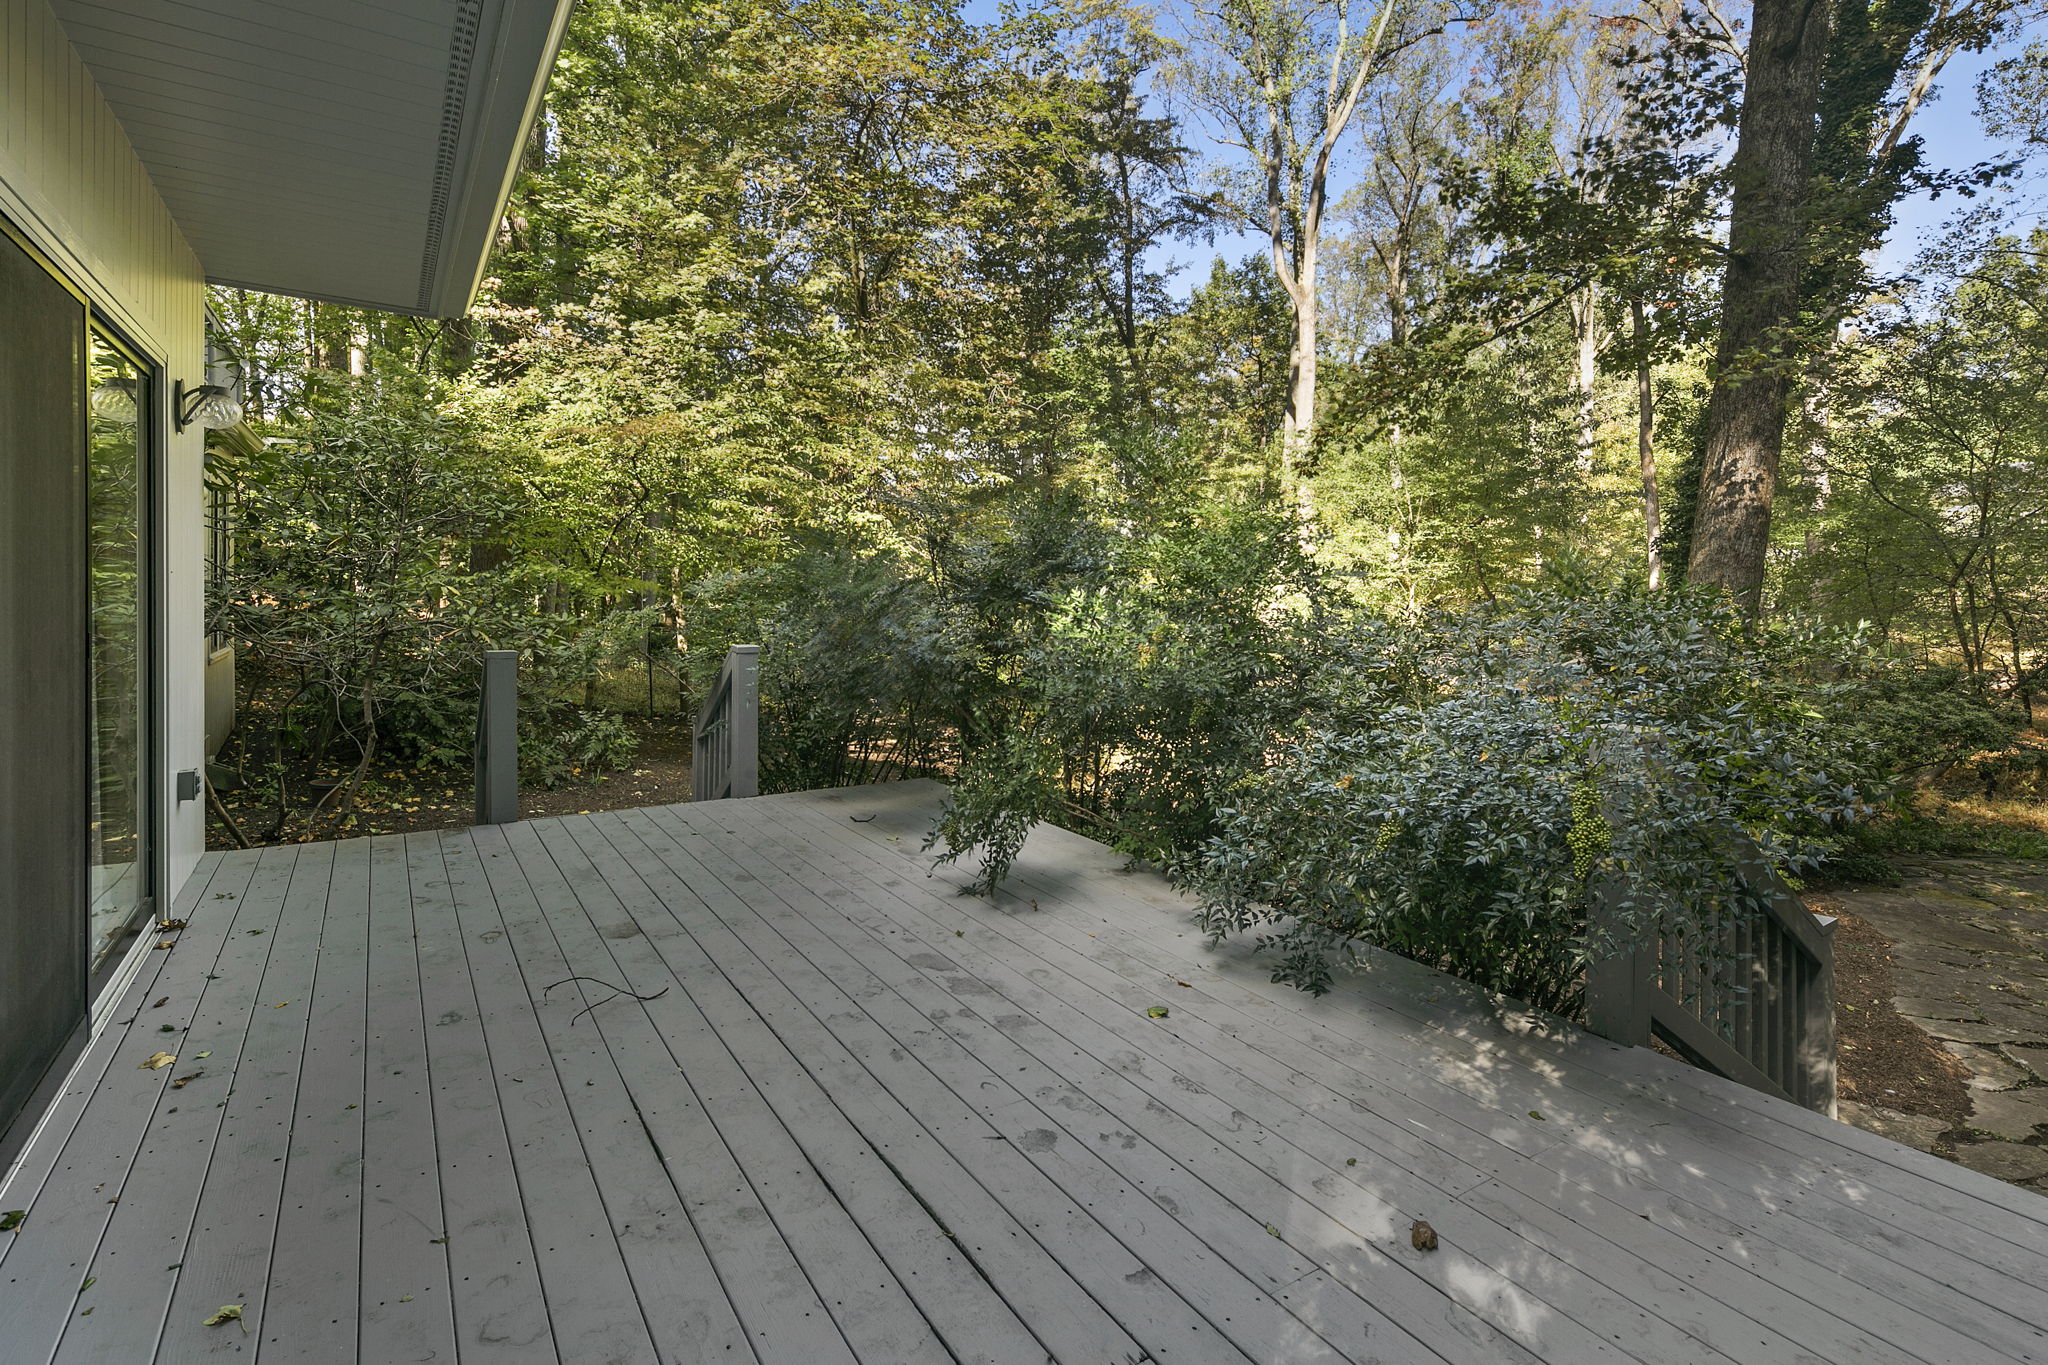  11110 Marcliff Rd, N Bethesda, MD 20852, US Photo 45